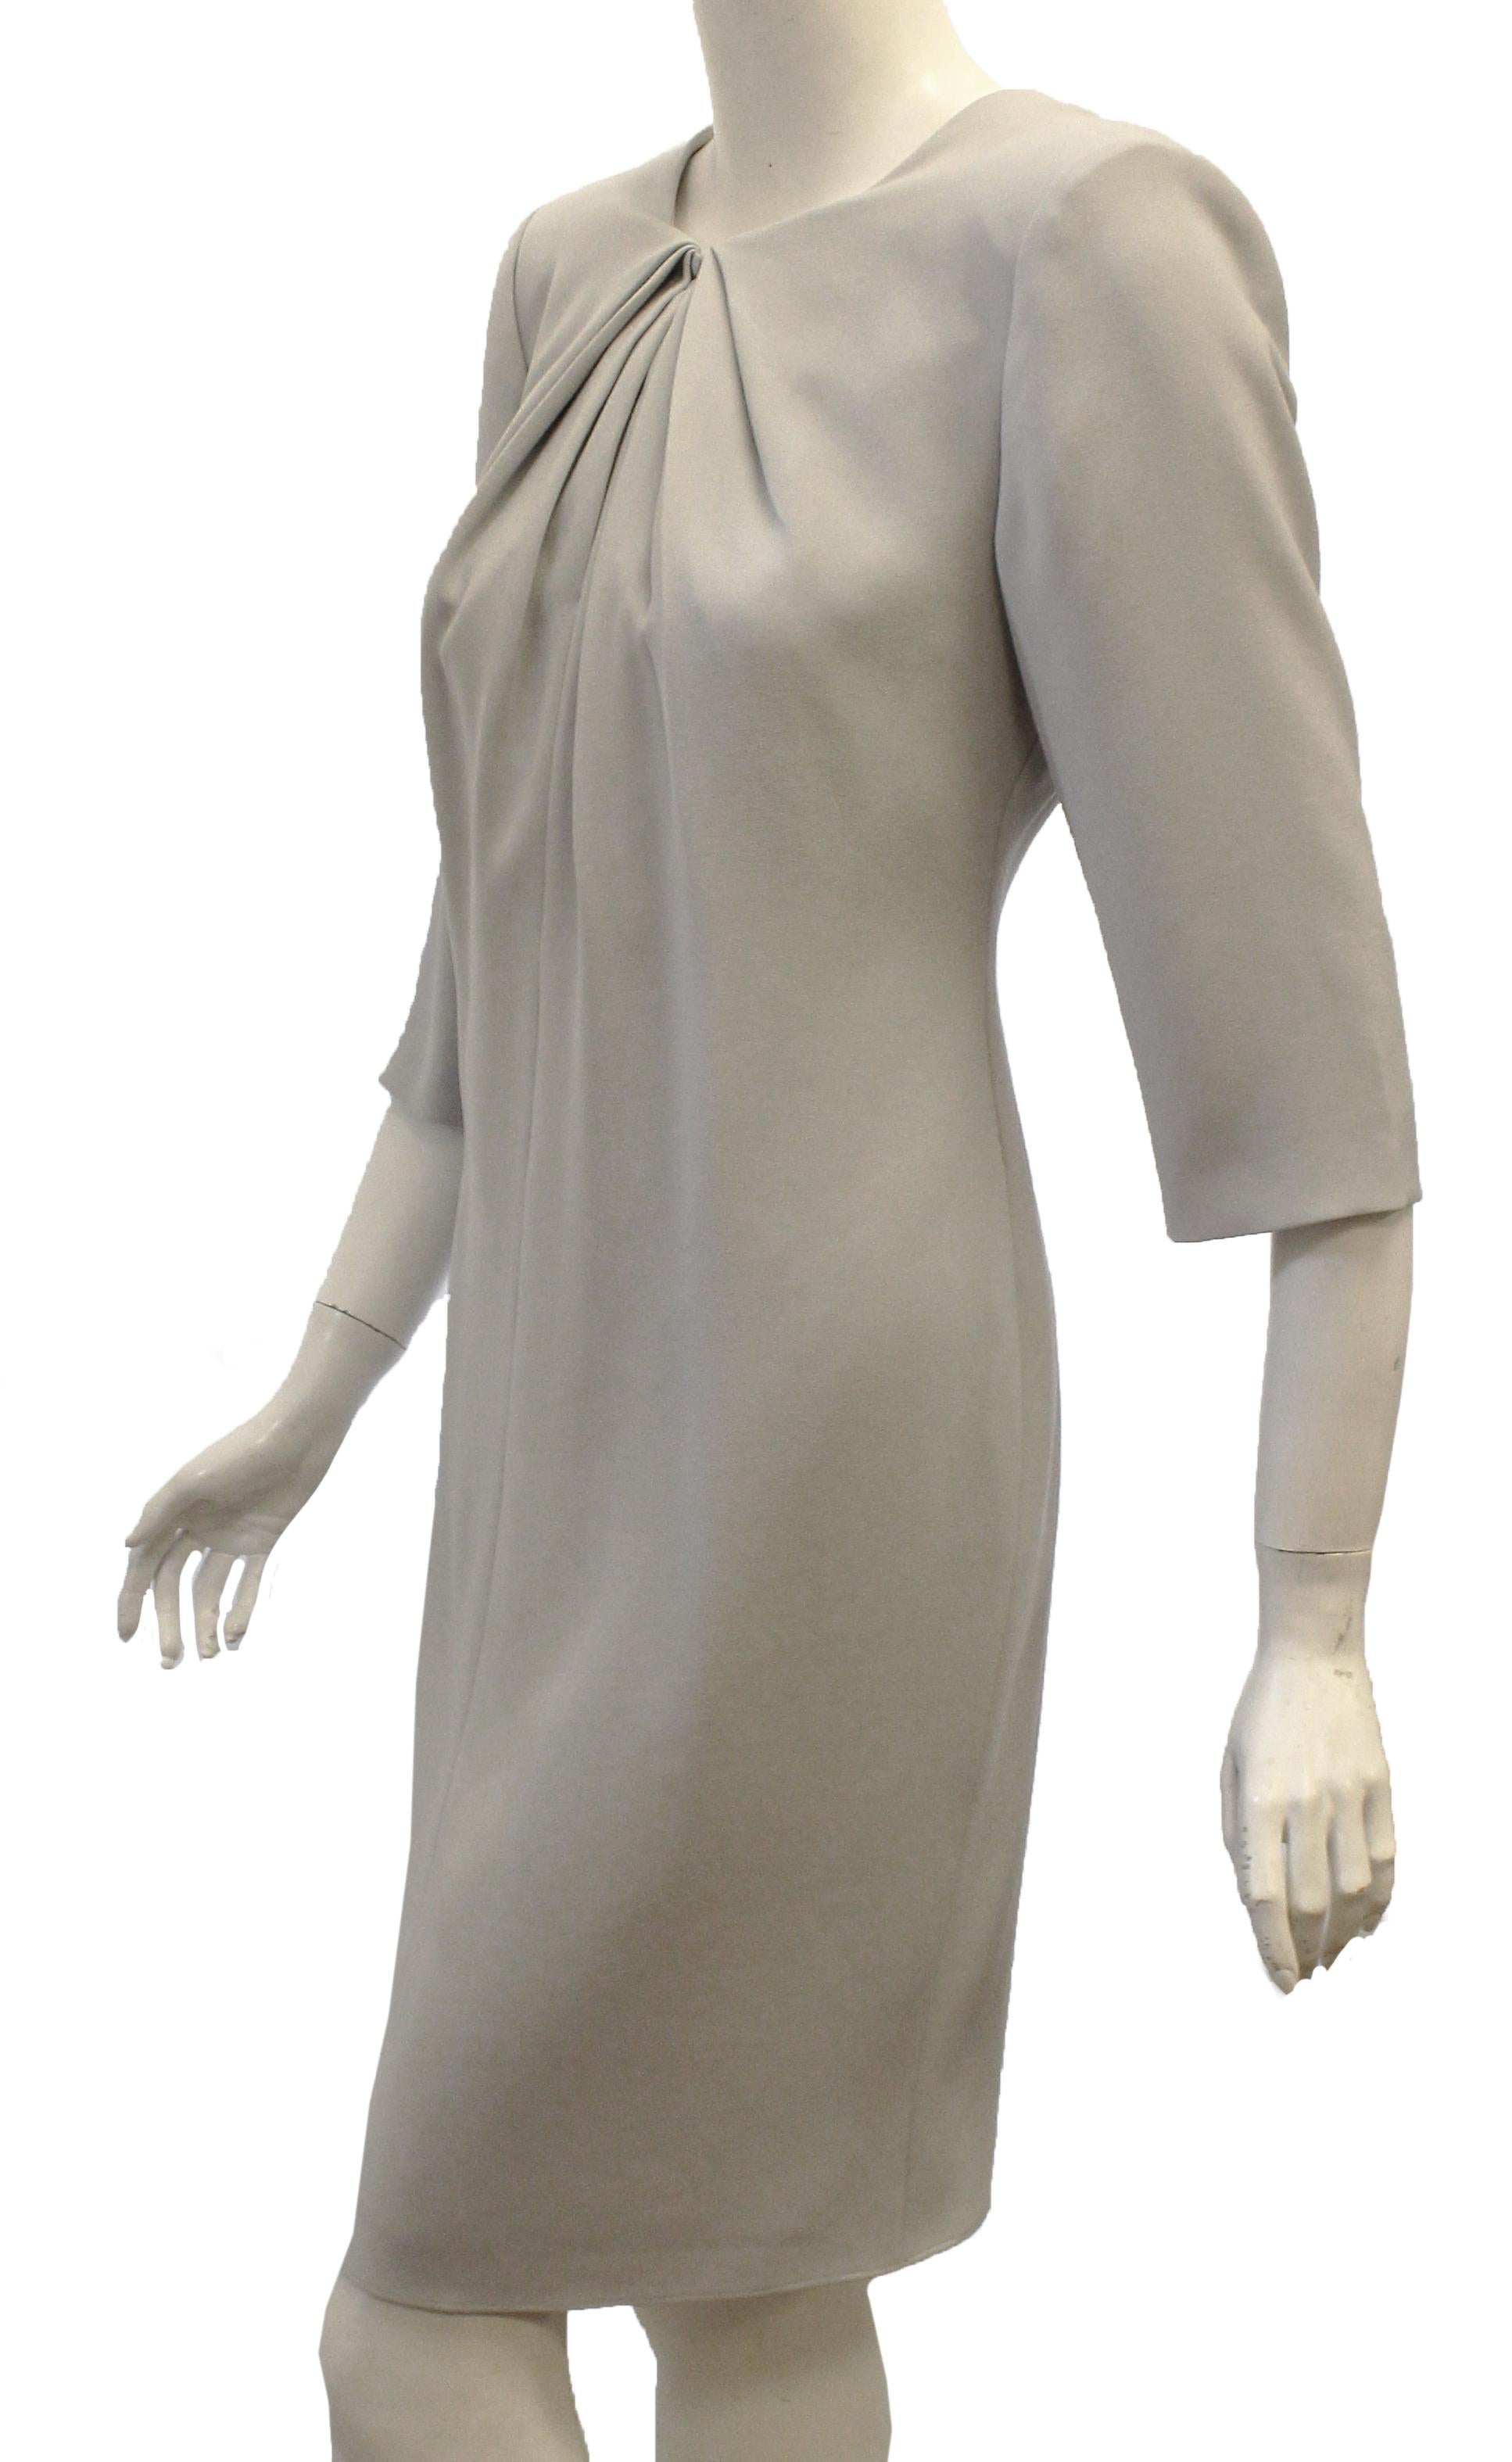 Armani Collezioni Grey Gathered Dress  In Excellent Condition For Sale In Palm Beach, FL